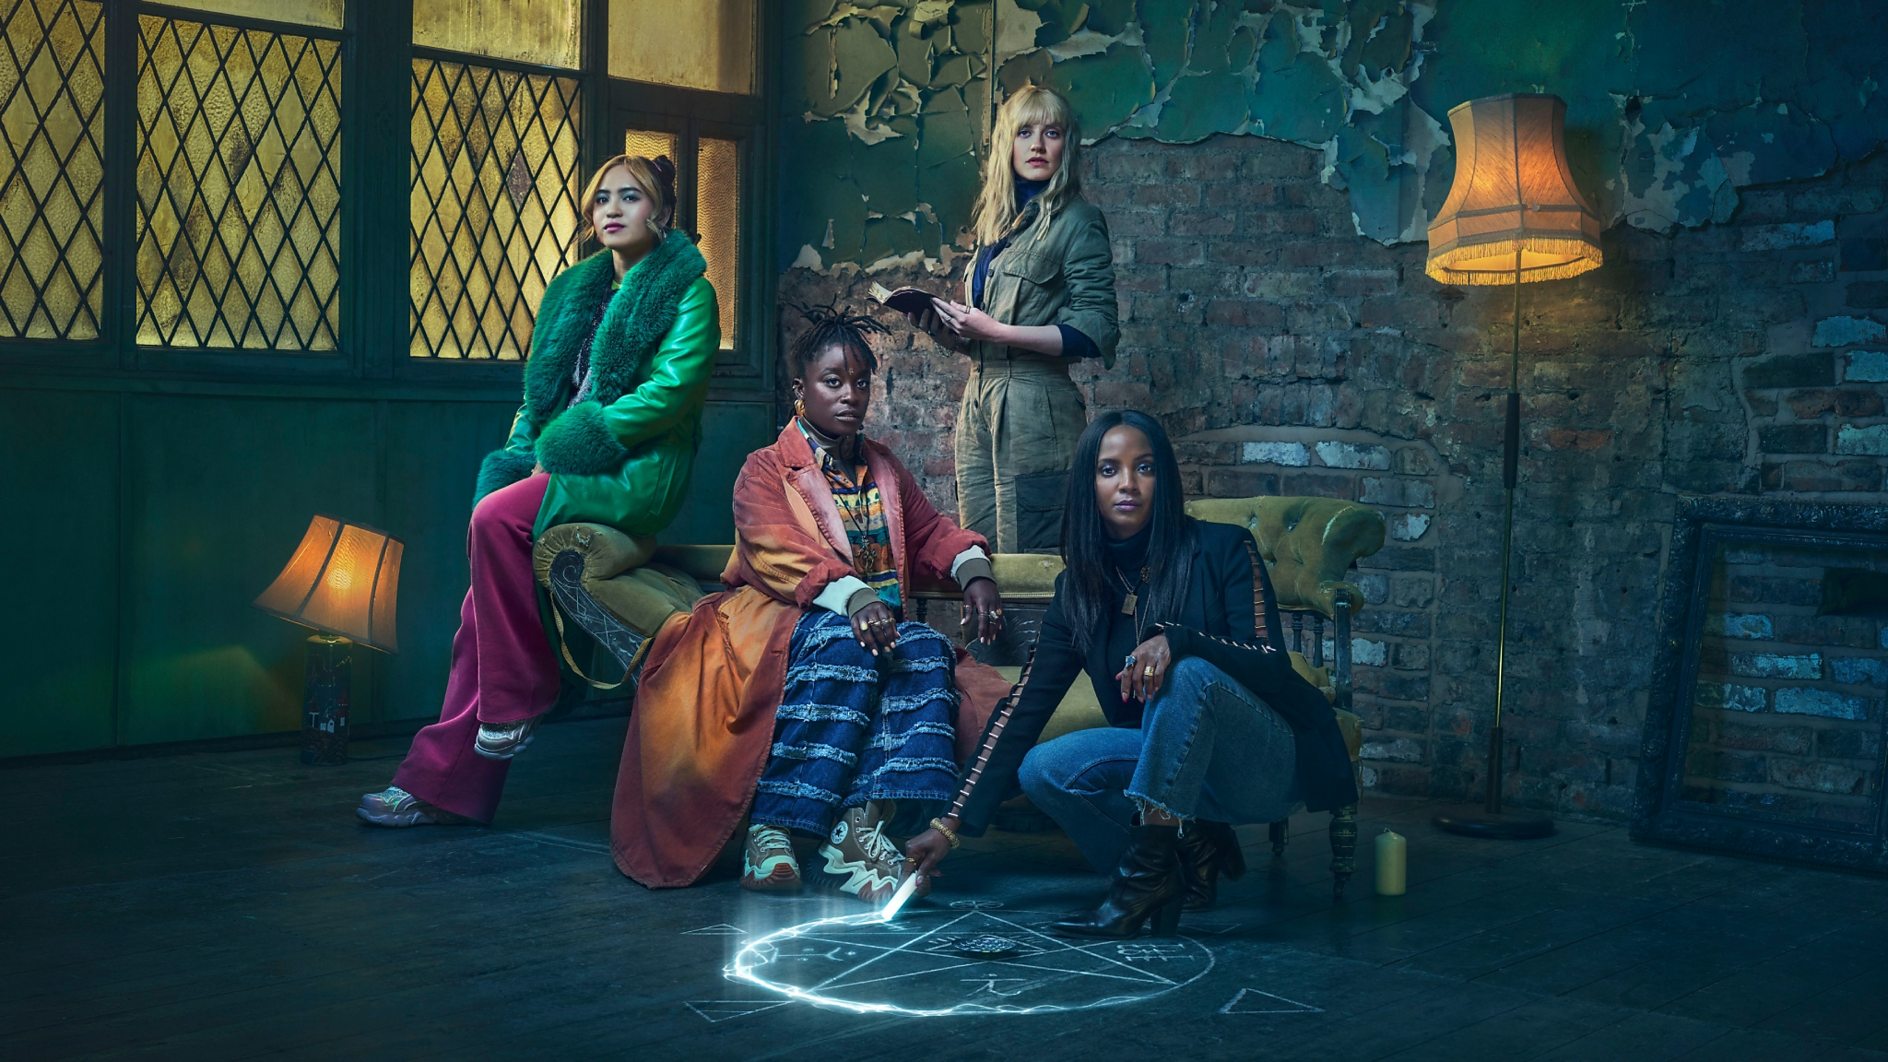 BBC release spell-binding trailer for Domino Day, the supernatural new drama about modern witches